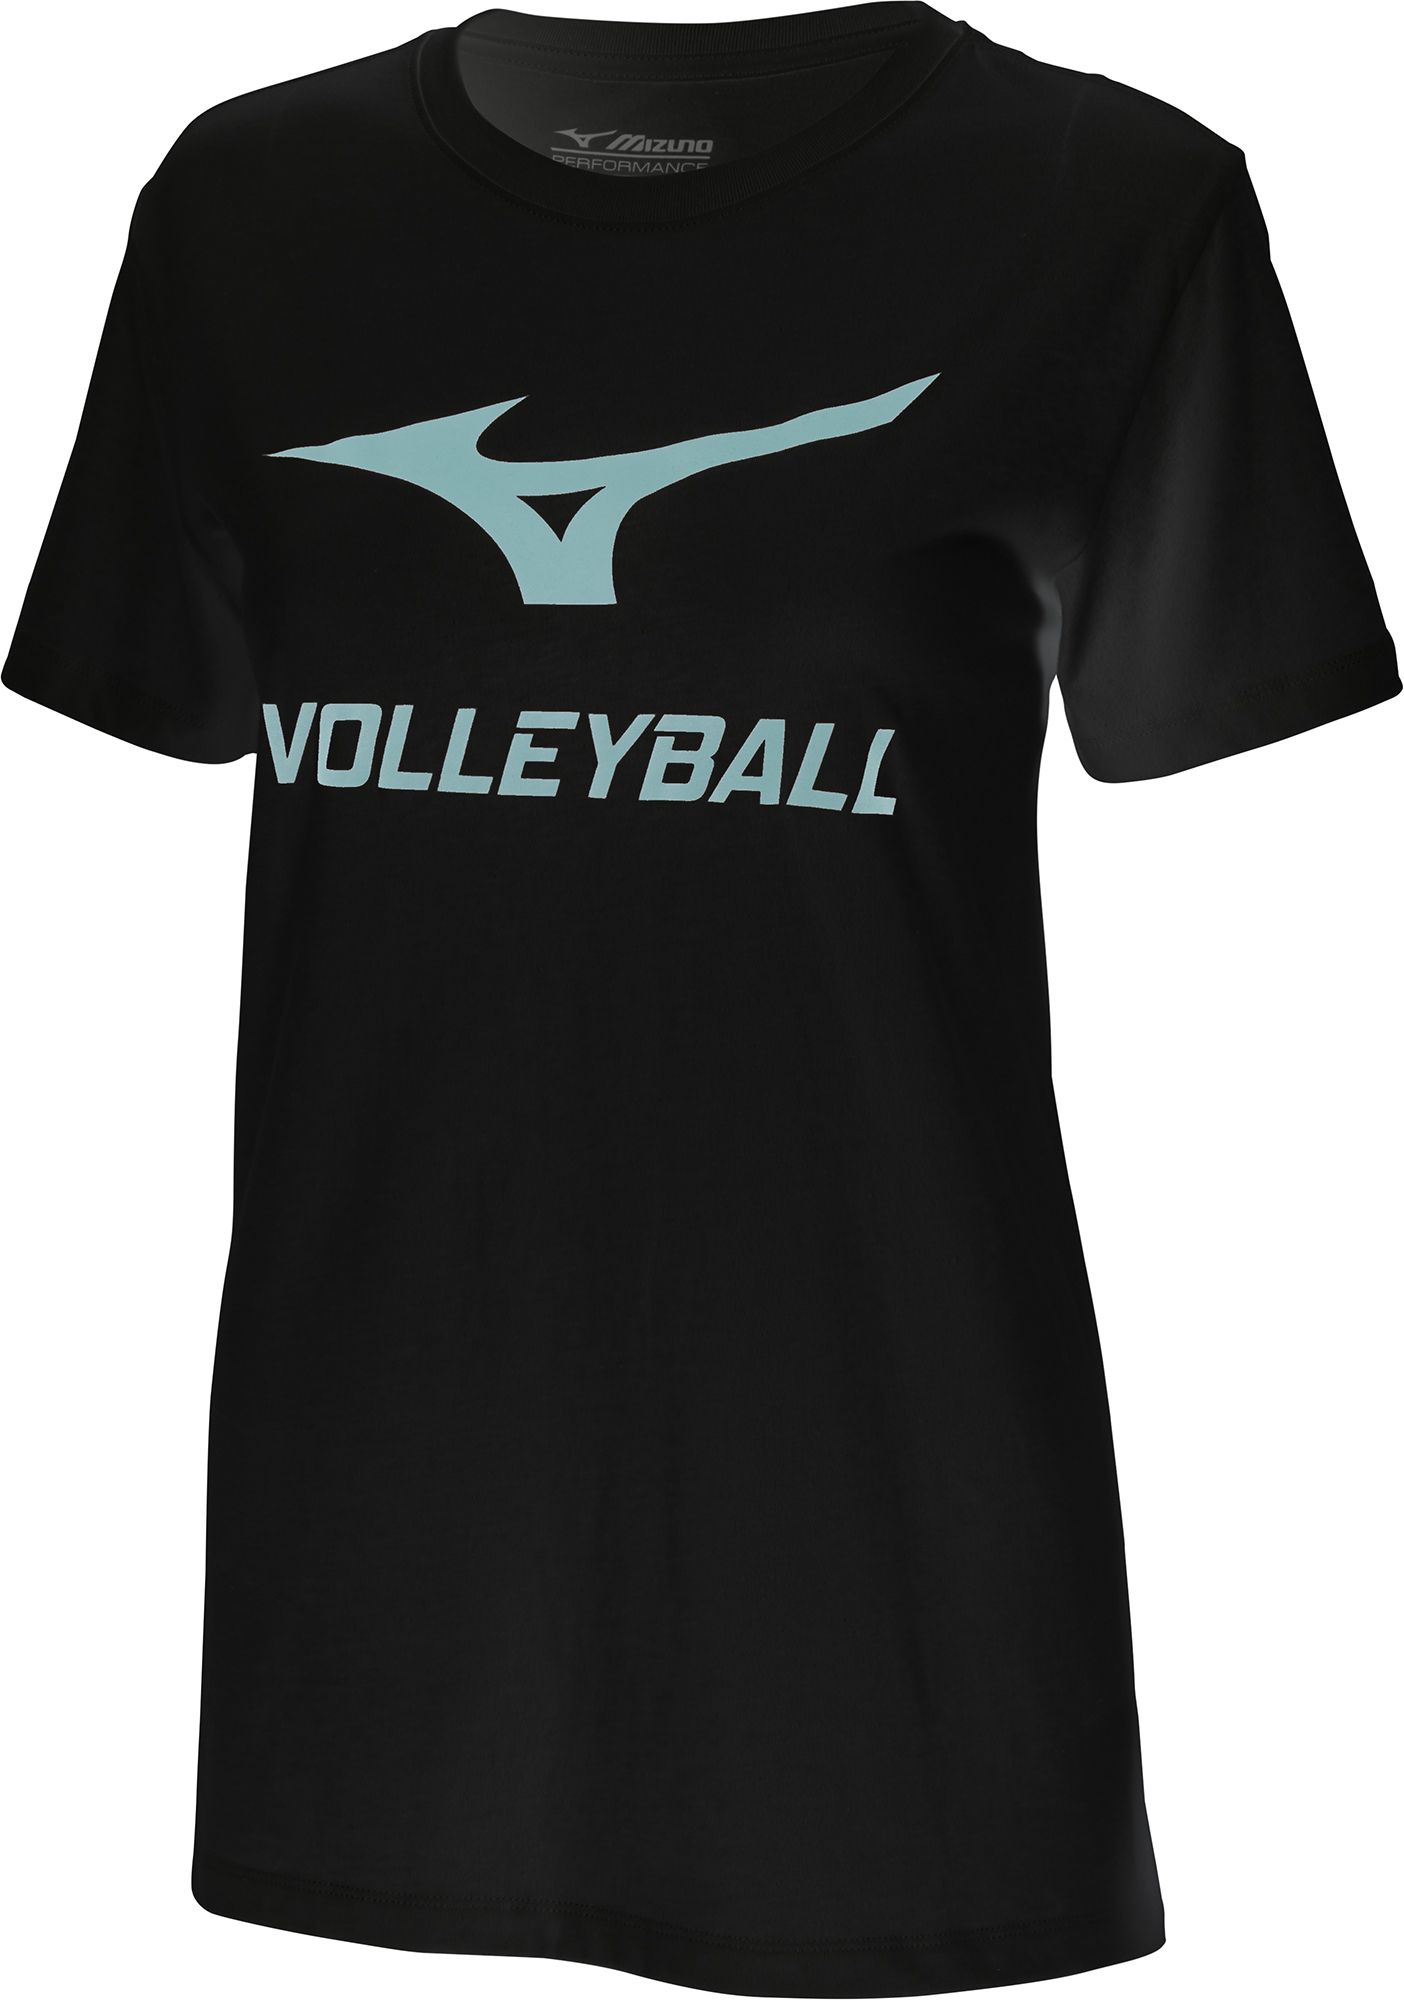 Mizuno Volleyball Apparel  Curbside Pickup Available at DICK'S